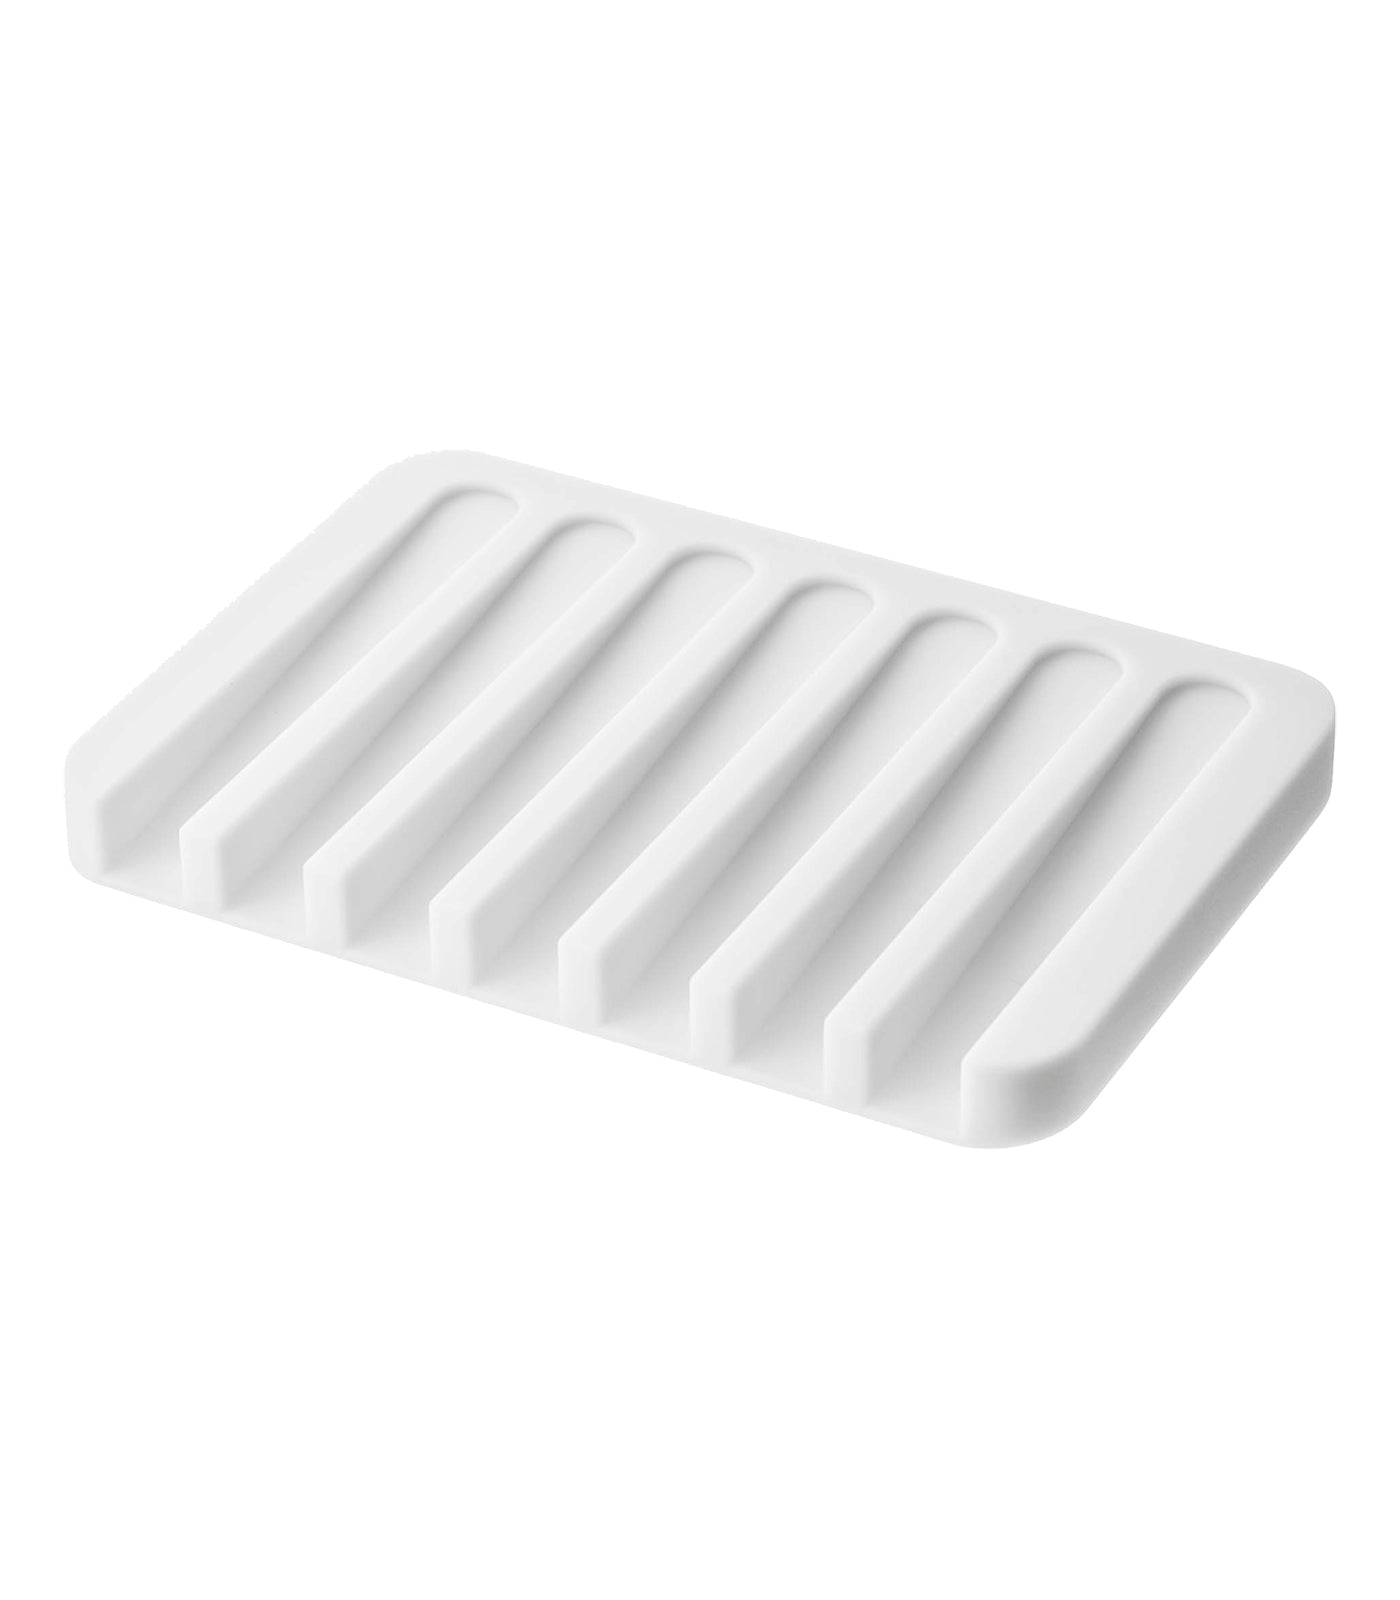 Self-Draining Soap Tray on a blank background.